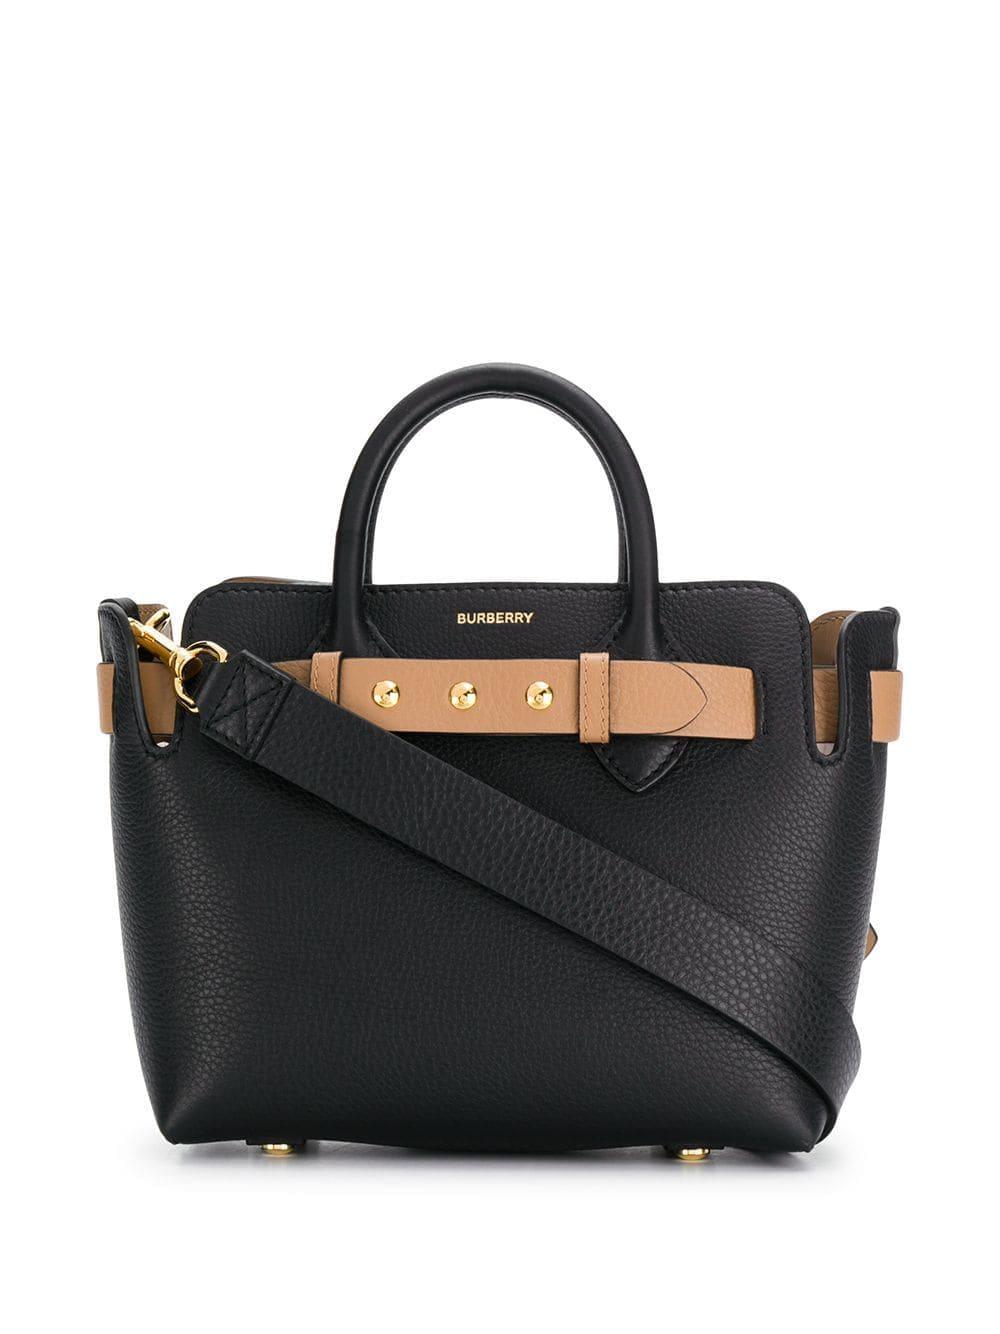 Burberry Leather Small Belt Bag in Black | Lyst